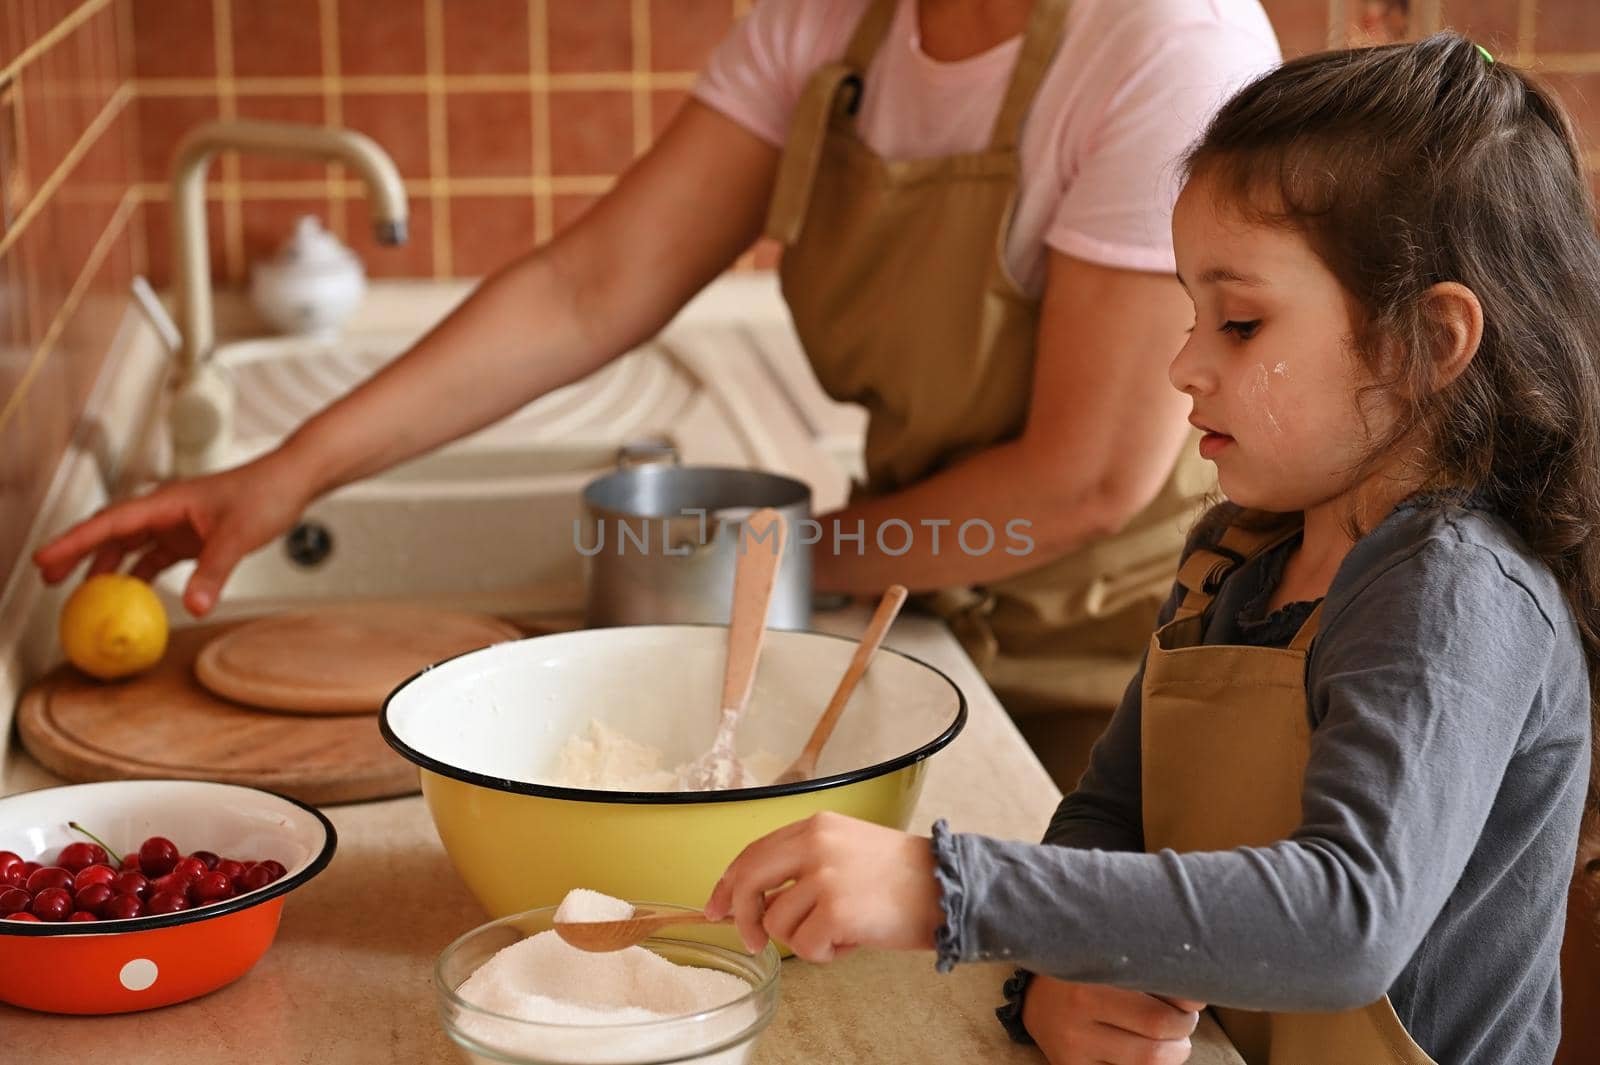 Domestic life. Cute little girl preparing dough with her mother in the home kitchen. Culinary and baking concept by artgf